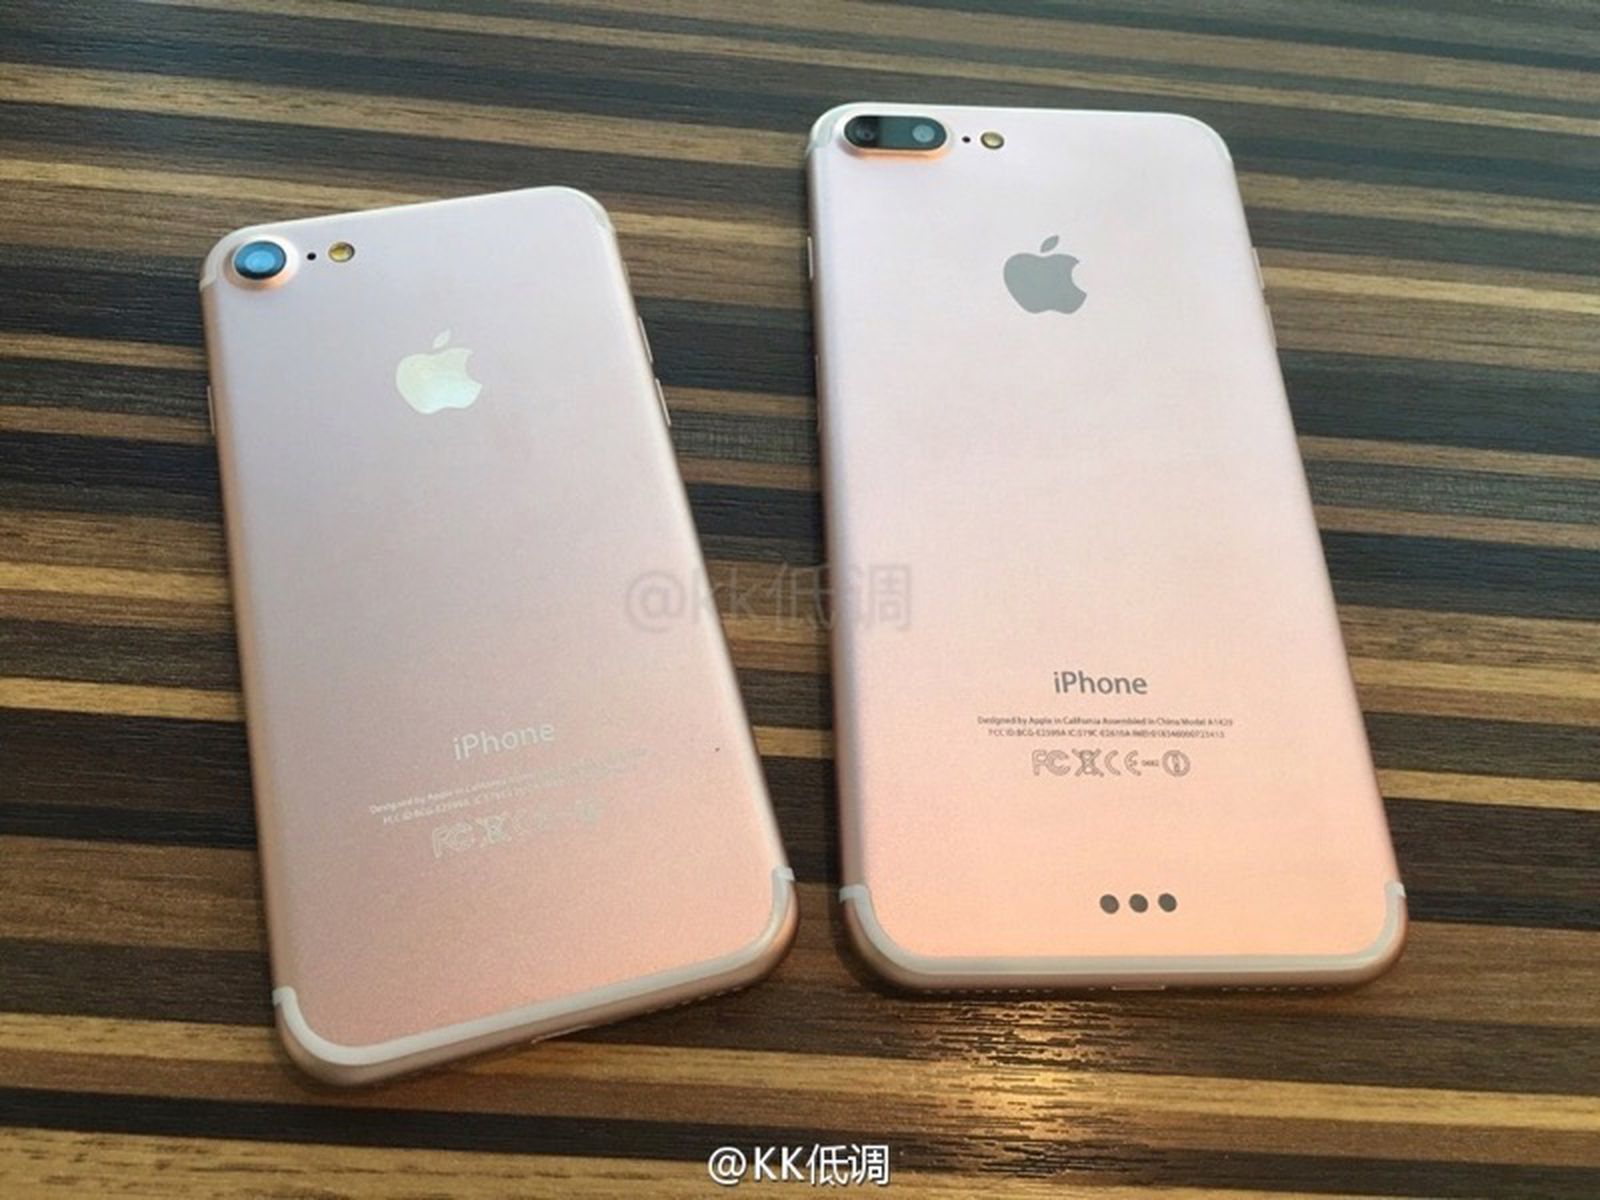 Iphone 7 Series Said To Feature 60fps 4k Video Recording Capability Macrumors